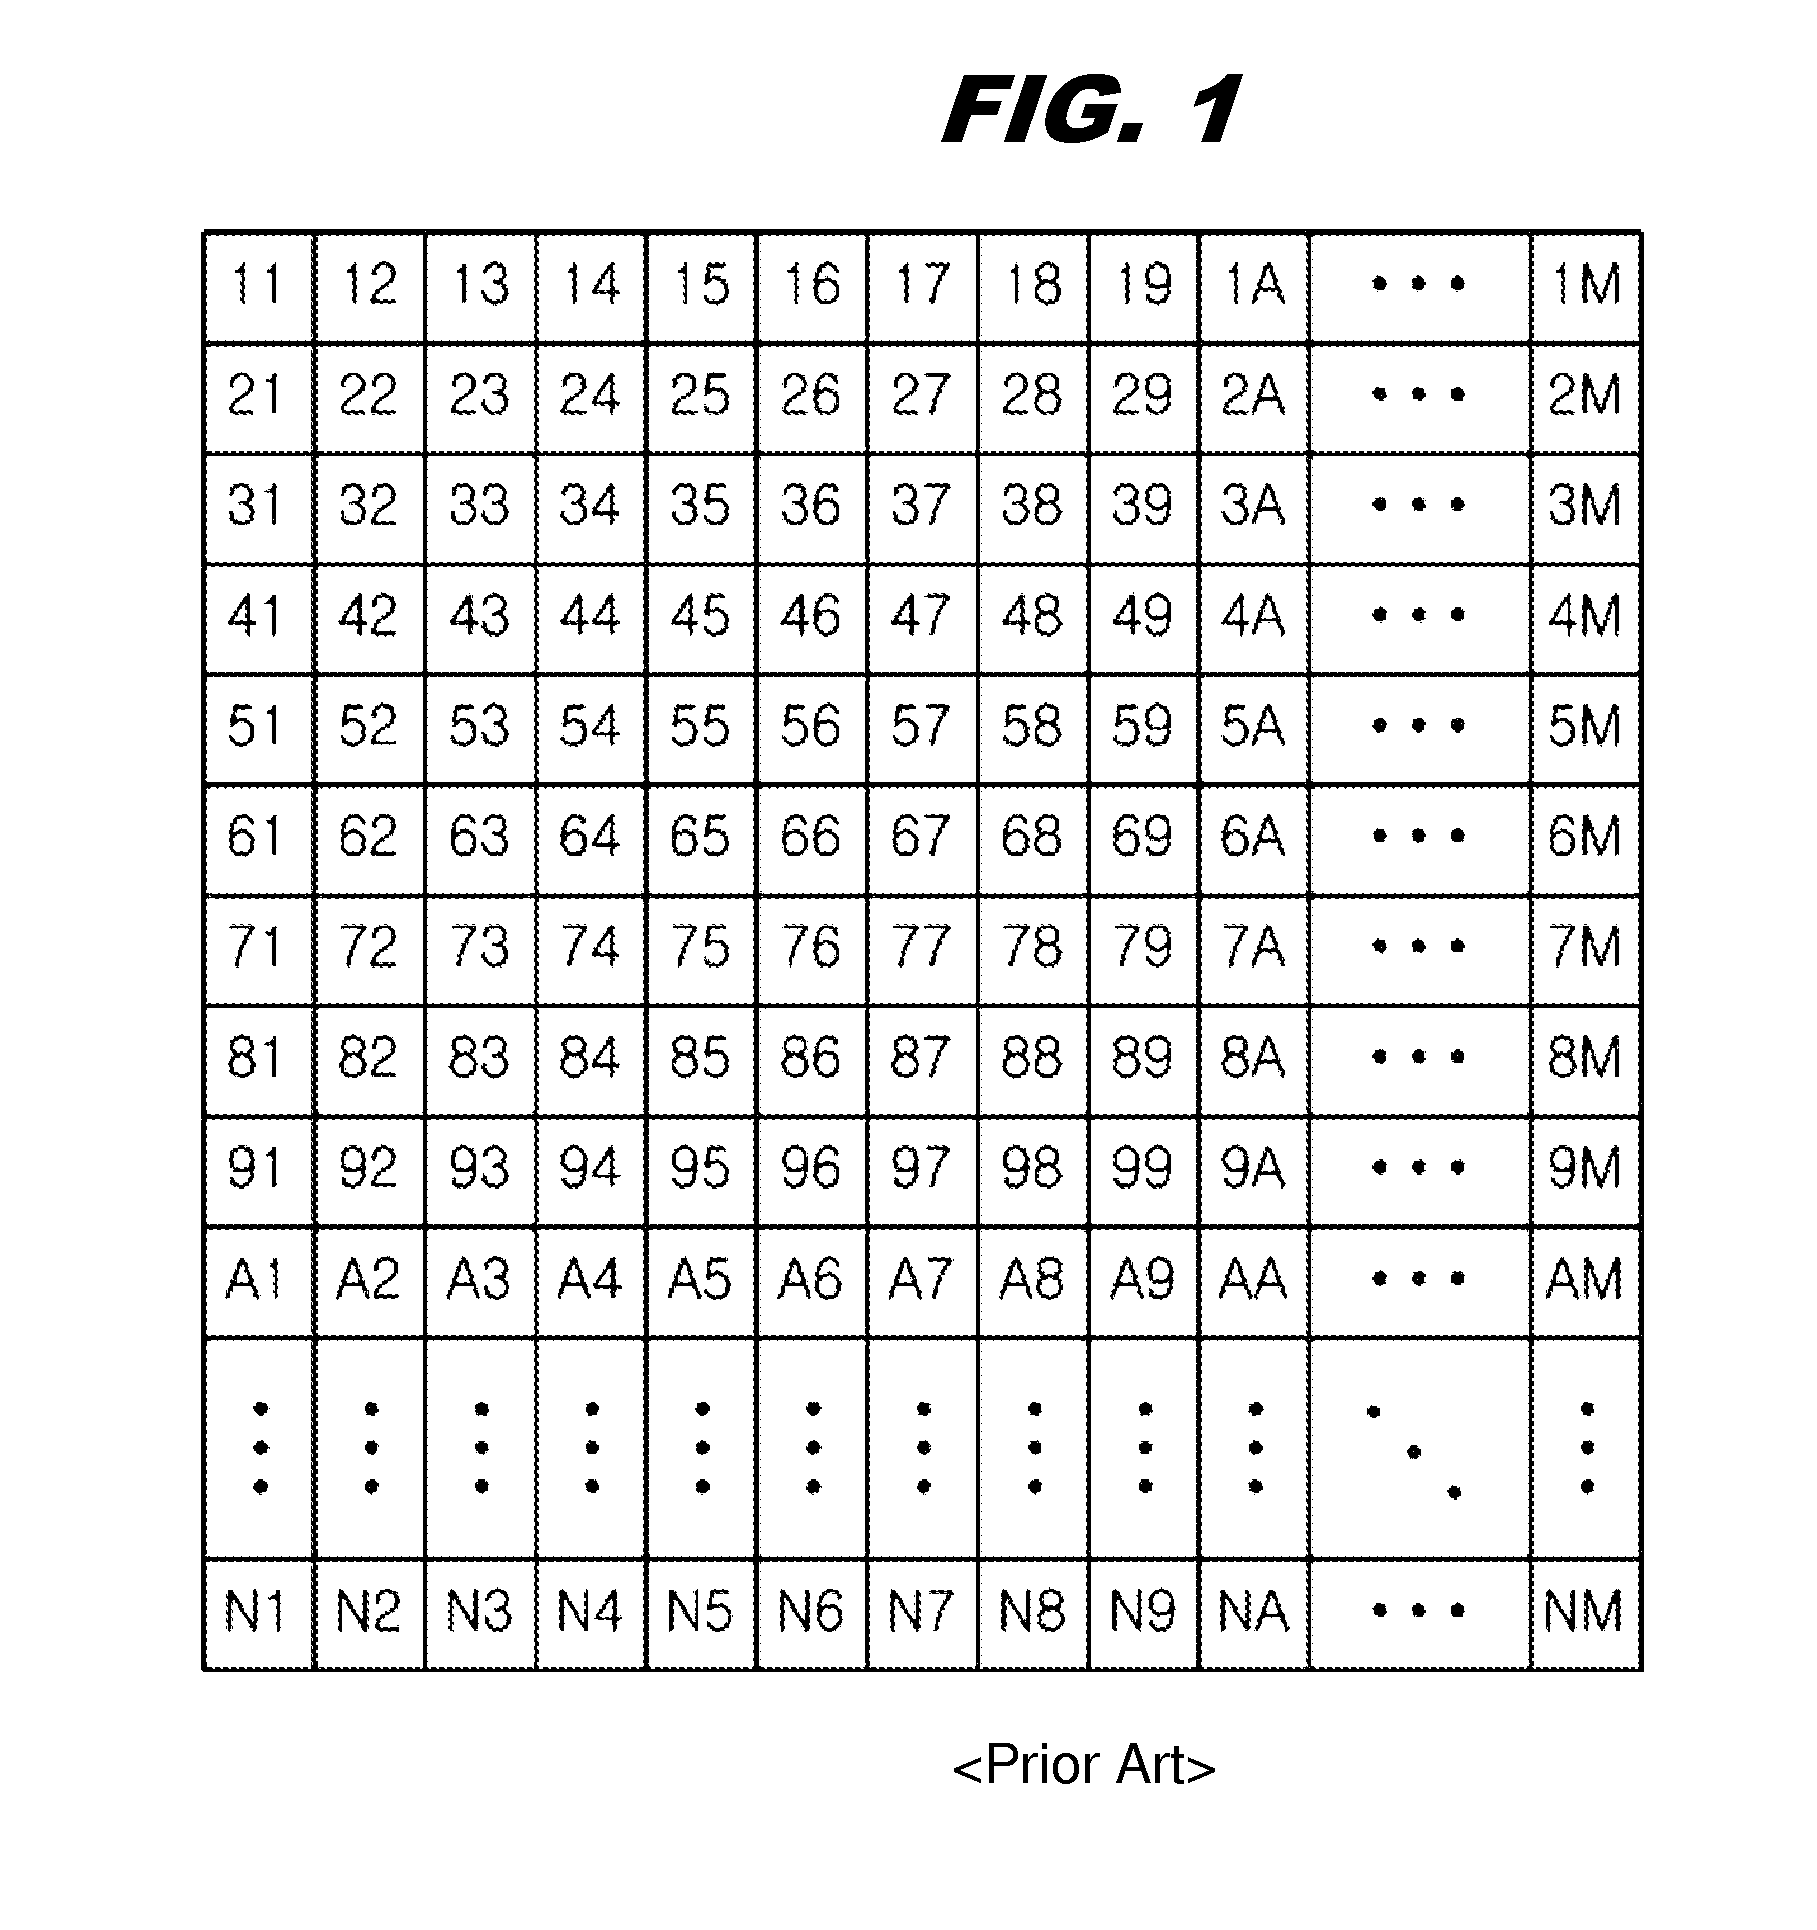 Pointing device having directional sensor and non-directional sensor, and pointing data input method using it